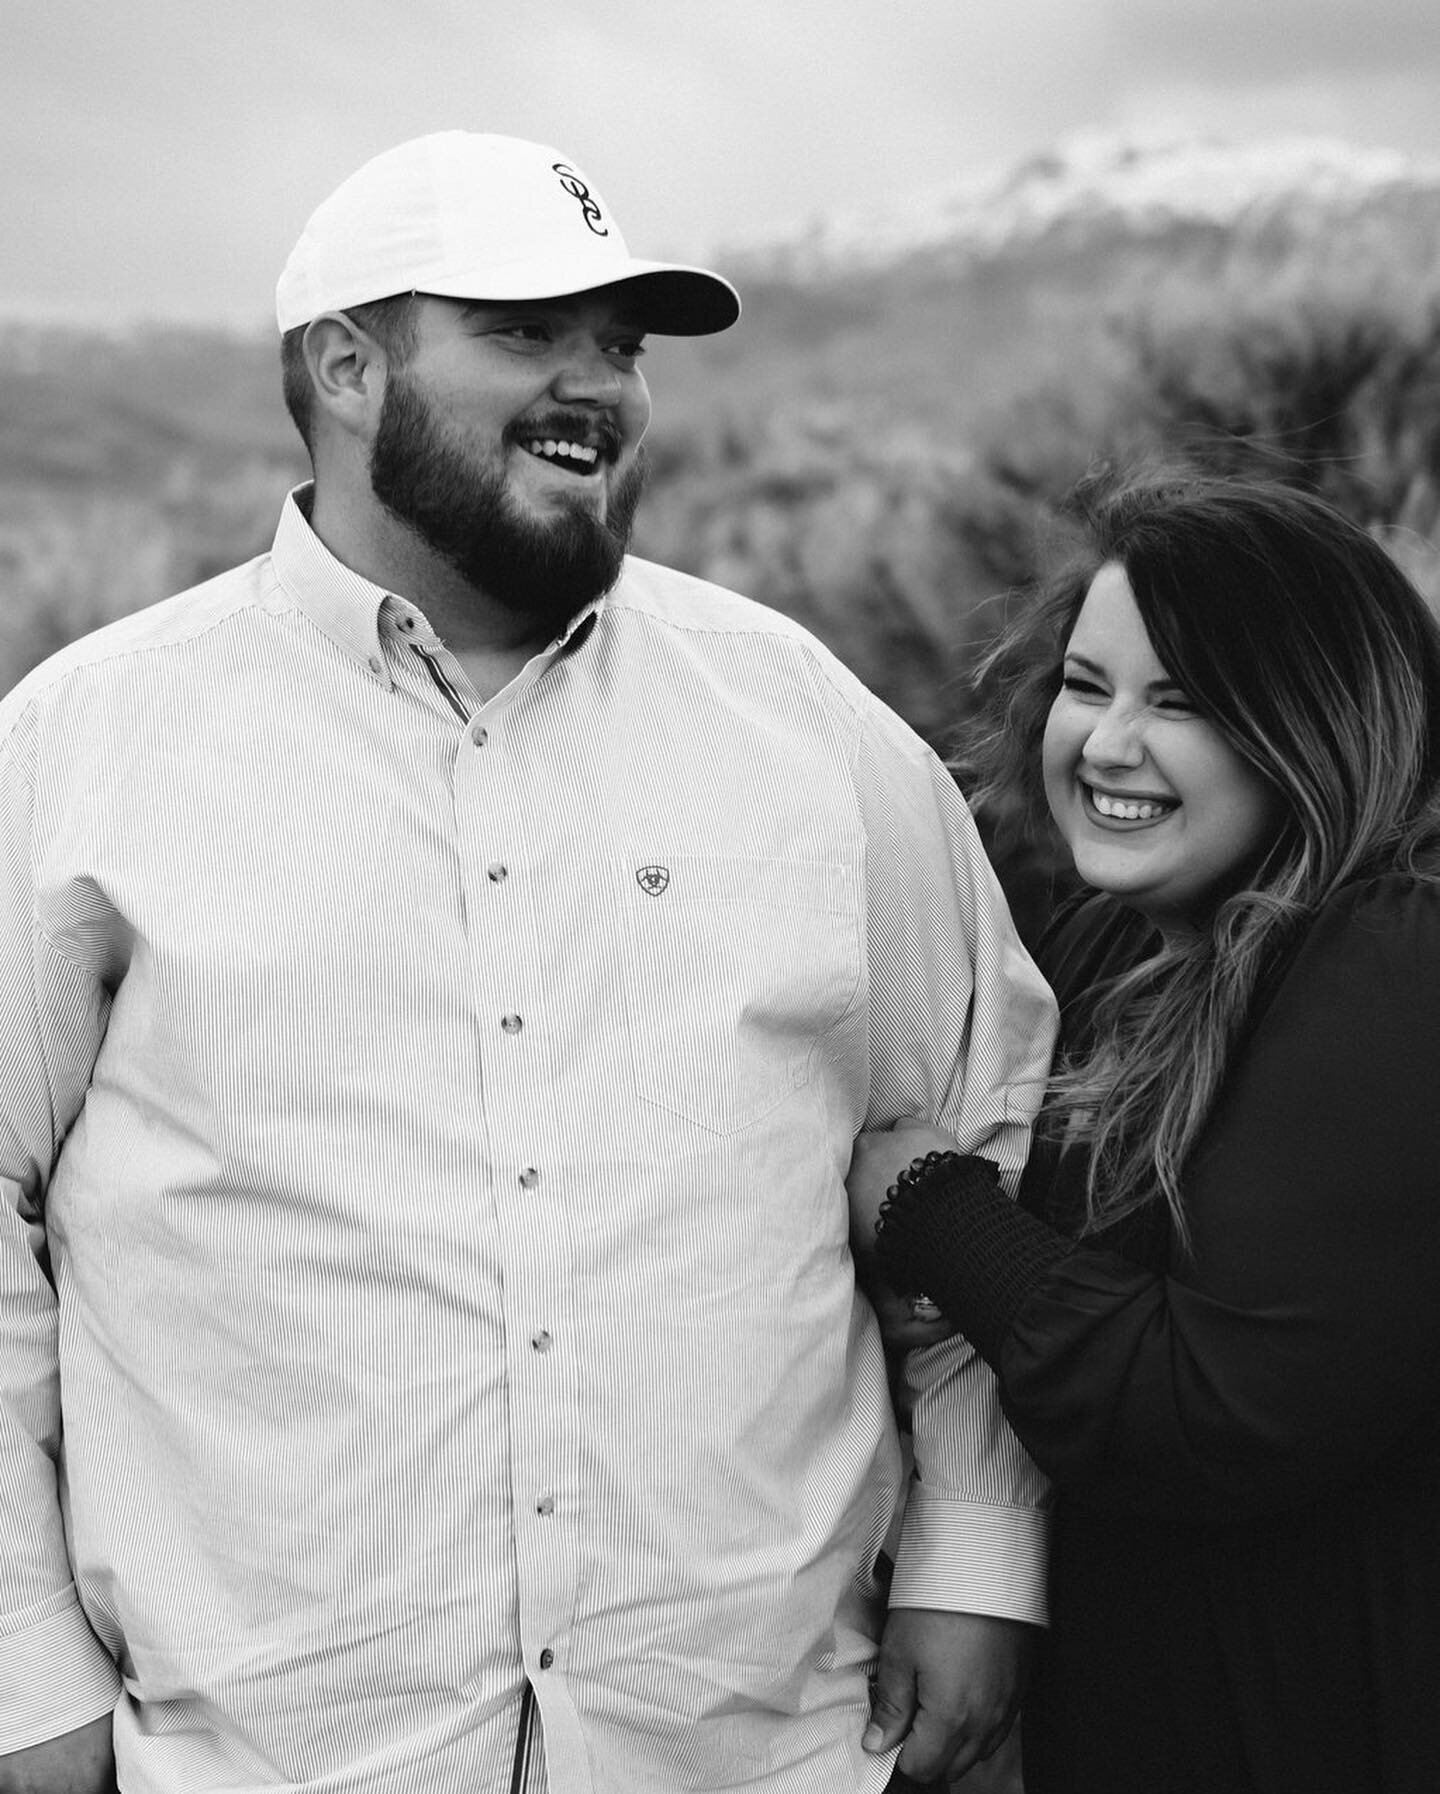 Hope and David came out to Cody in June on vacation and wanted to get some pictures taken. So I showed them the south fork and what 50mph wind feels like lol. Then they got engaged a few weeks ago and now I&rsquo;m just over here patiently waiting fo